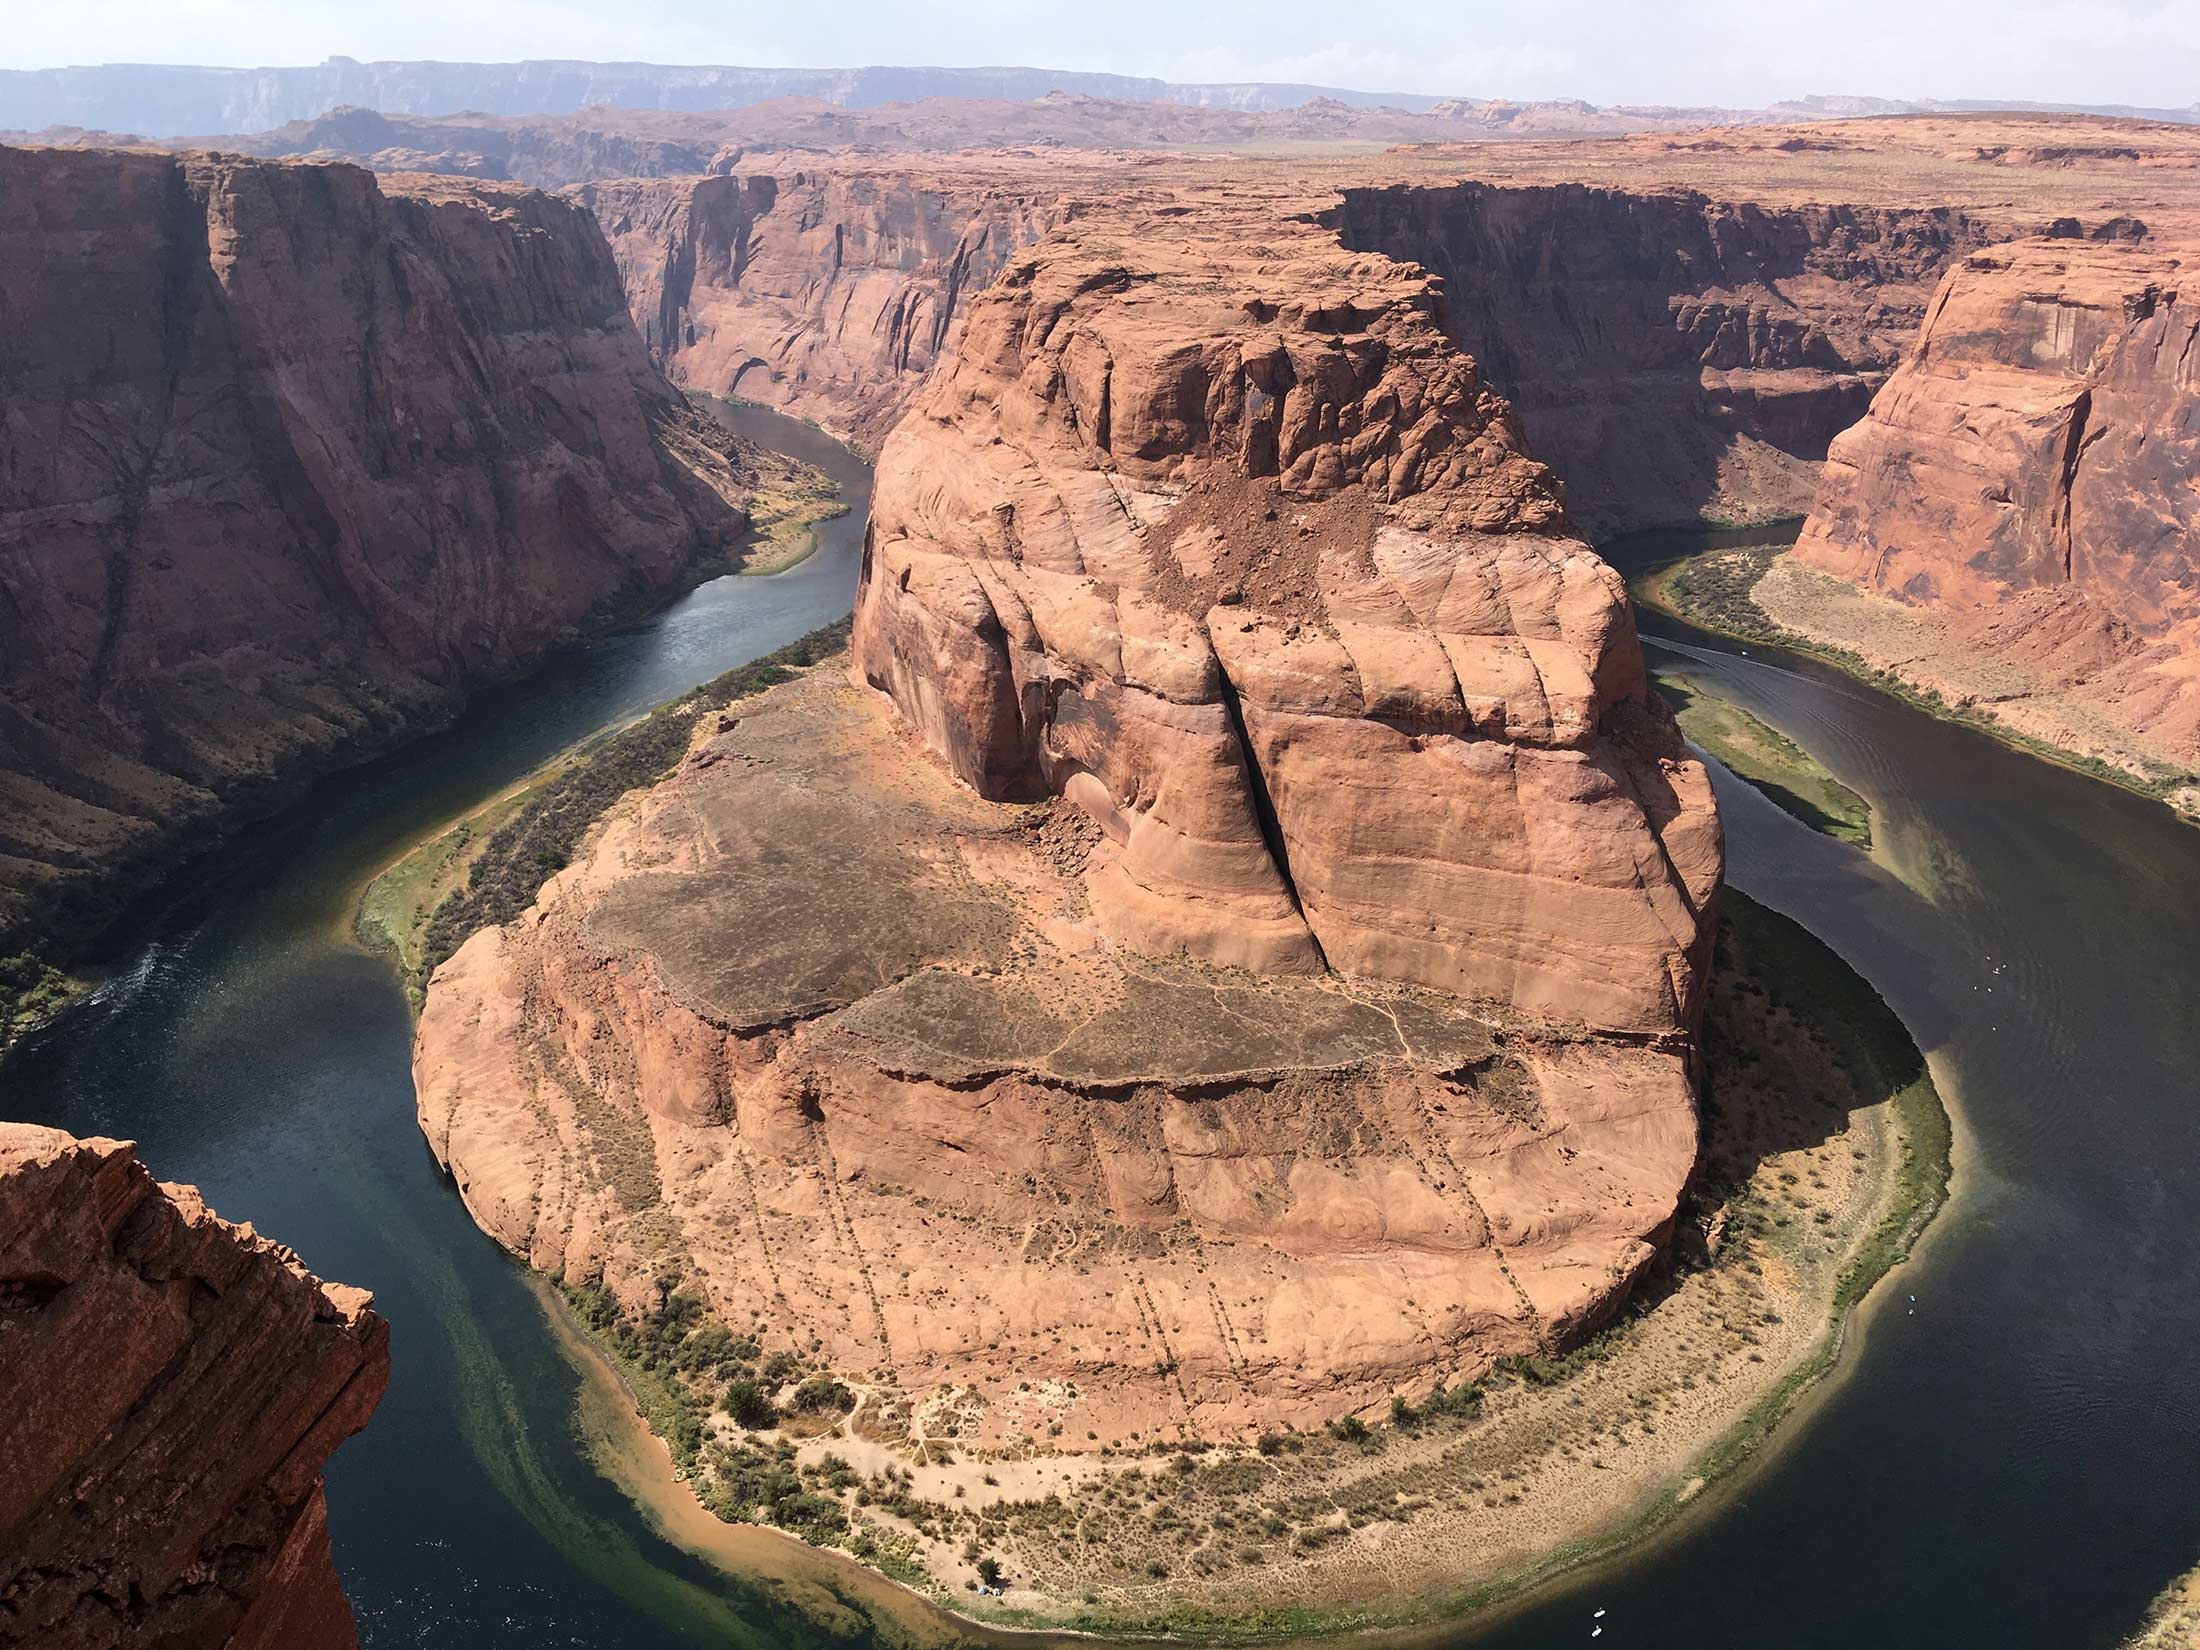 Heat is creating cycles that contribute to drought, drying out soil, and melting snow more quickly. That leaves less water in the Colorado River, seen here near Page, Ariz.
